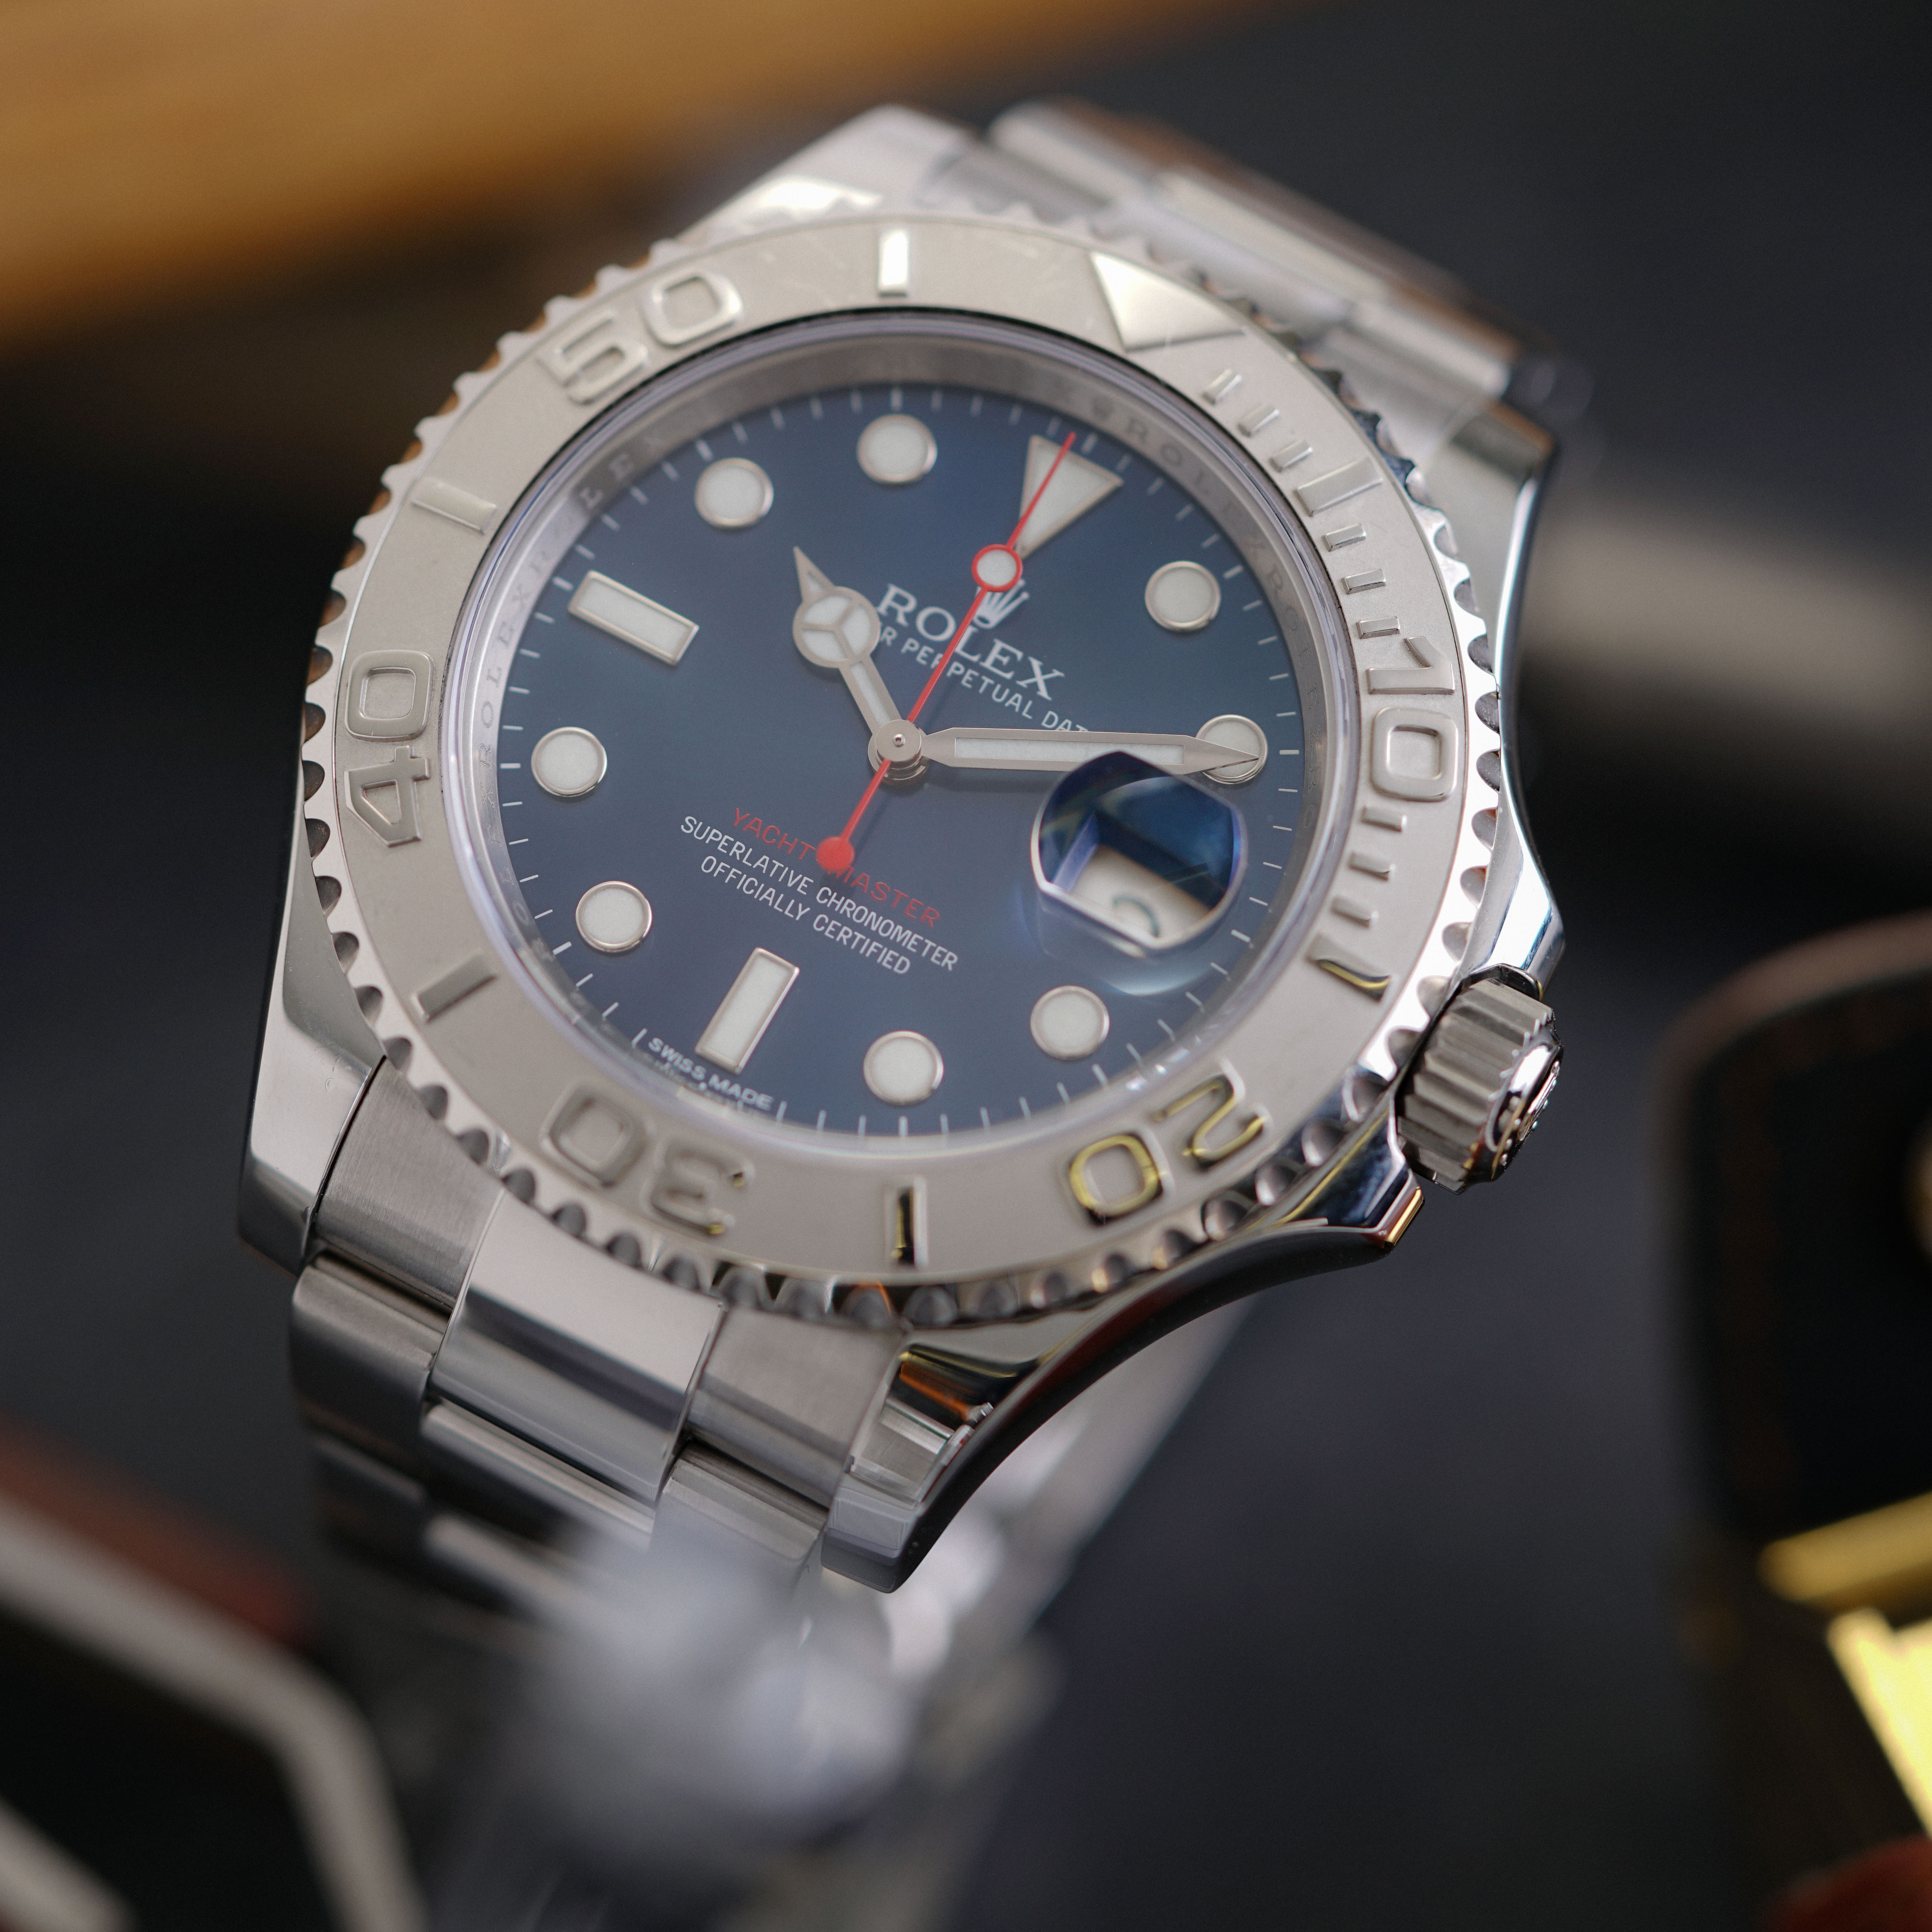 Rolex Yacht-Master 40mm Stainless Steel, Platinum Bezel, Blue Dial, Oyster Bracelet Ref. 116622 Pre-owned - NYC Luxury - Pre Owned